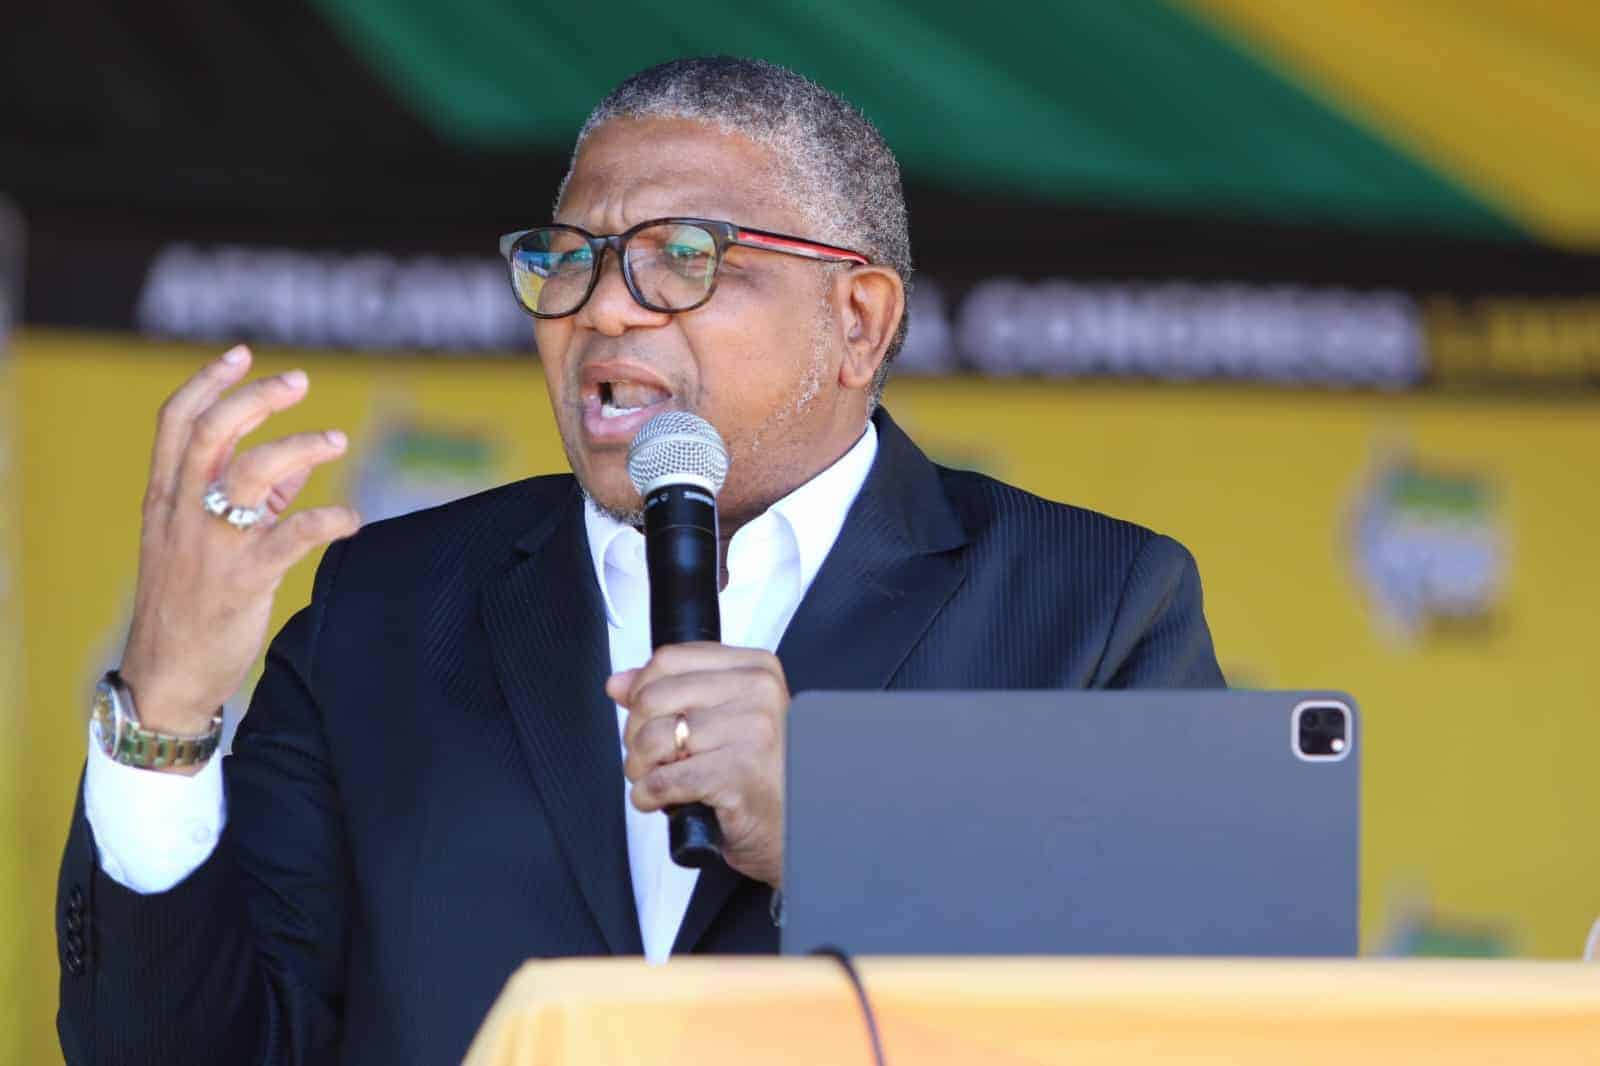 ‘Heroes can become villains’ – Mbalula on MK party after day at Electoral Court